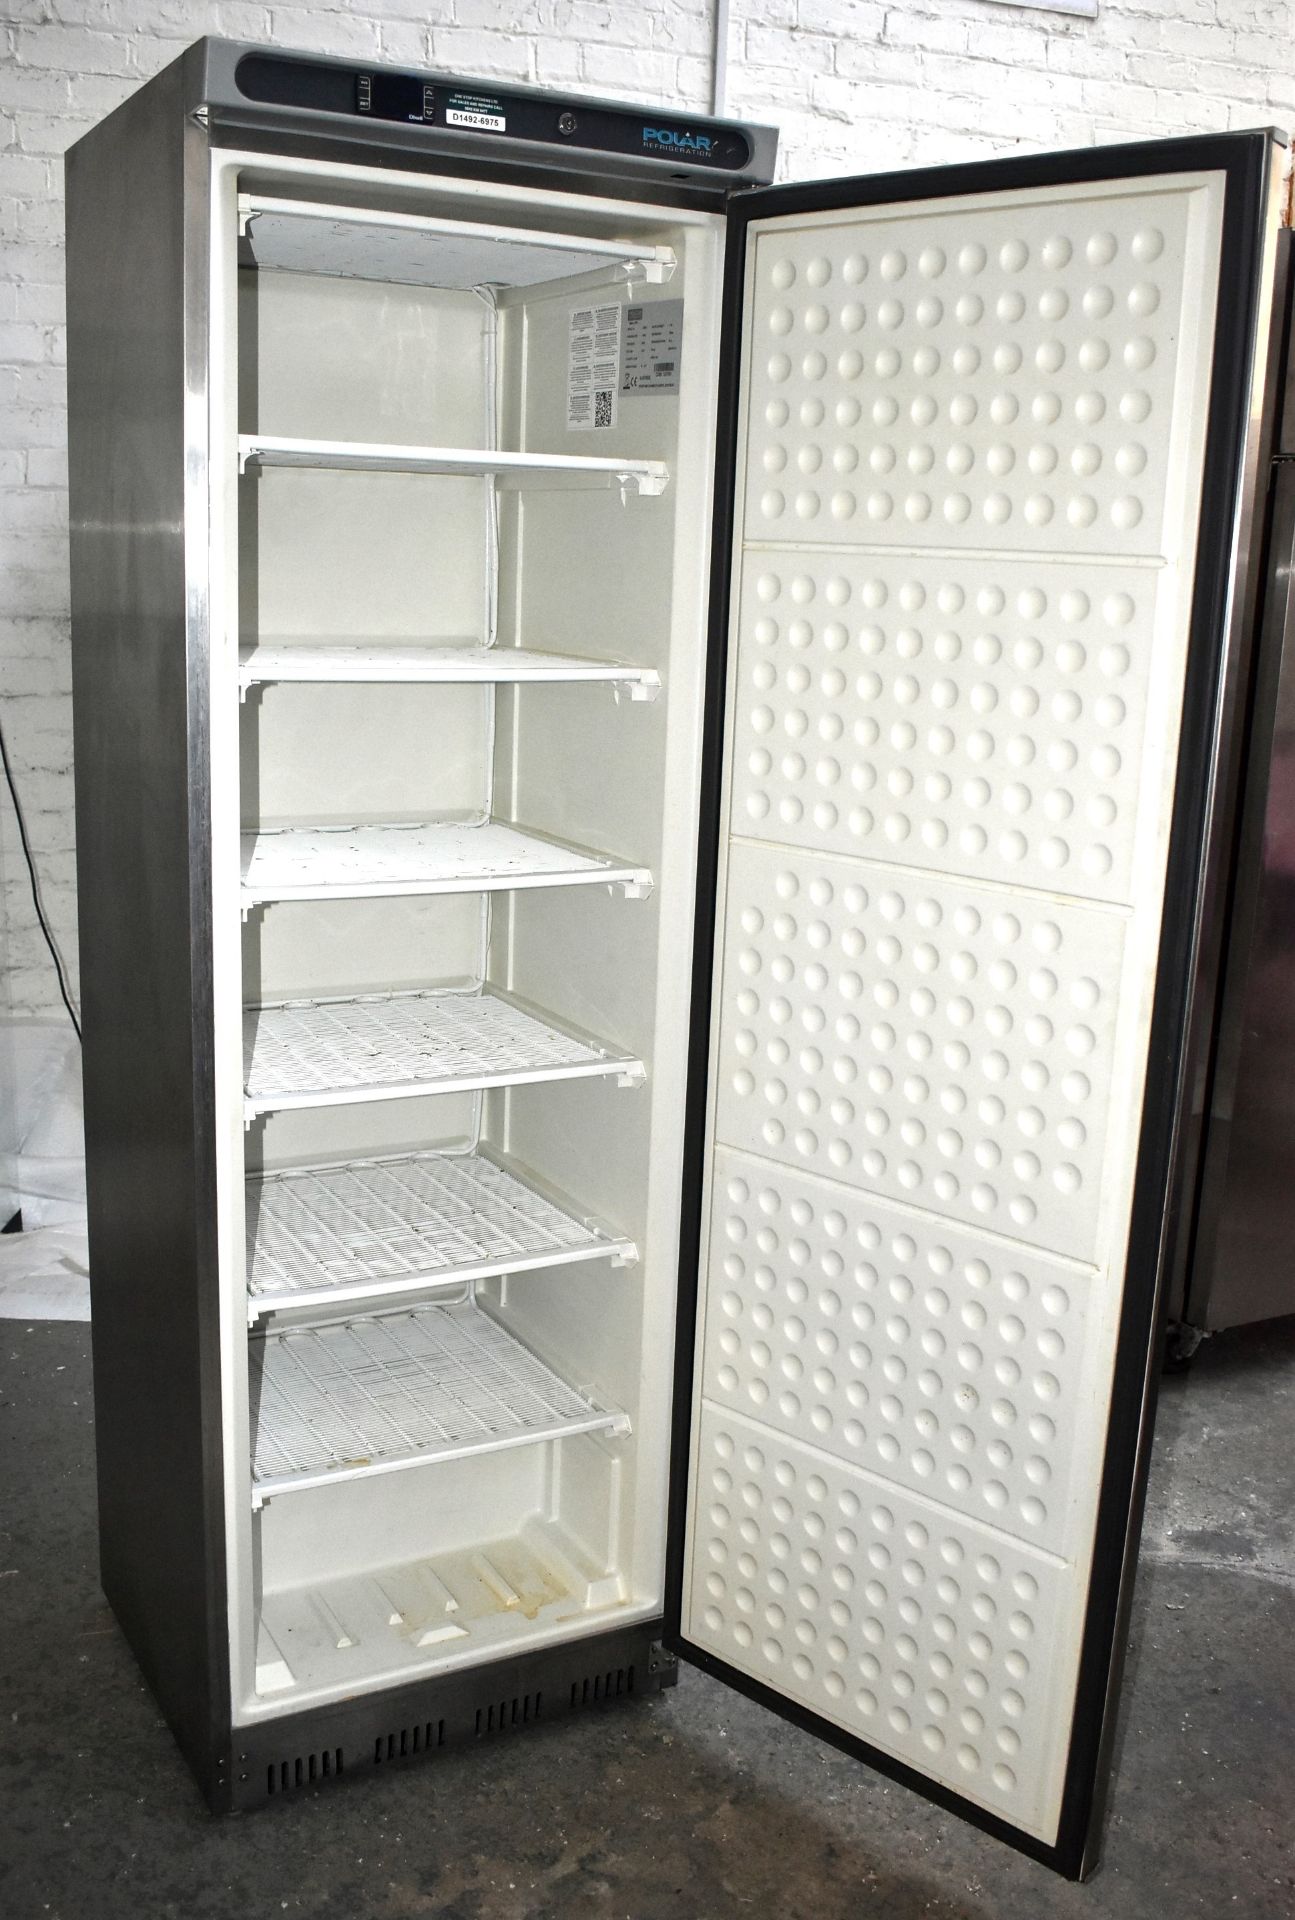 1 x Polar C-Series Commercial Upright Freezer With Stainless Steel Finish - 365Ltr Capacity - Image 2 of 7